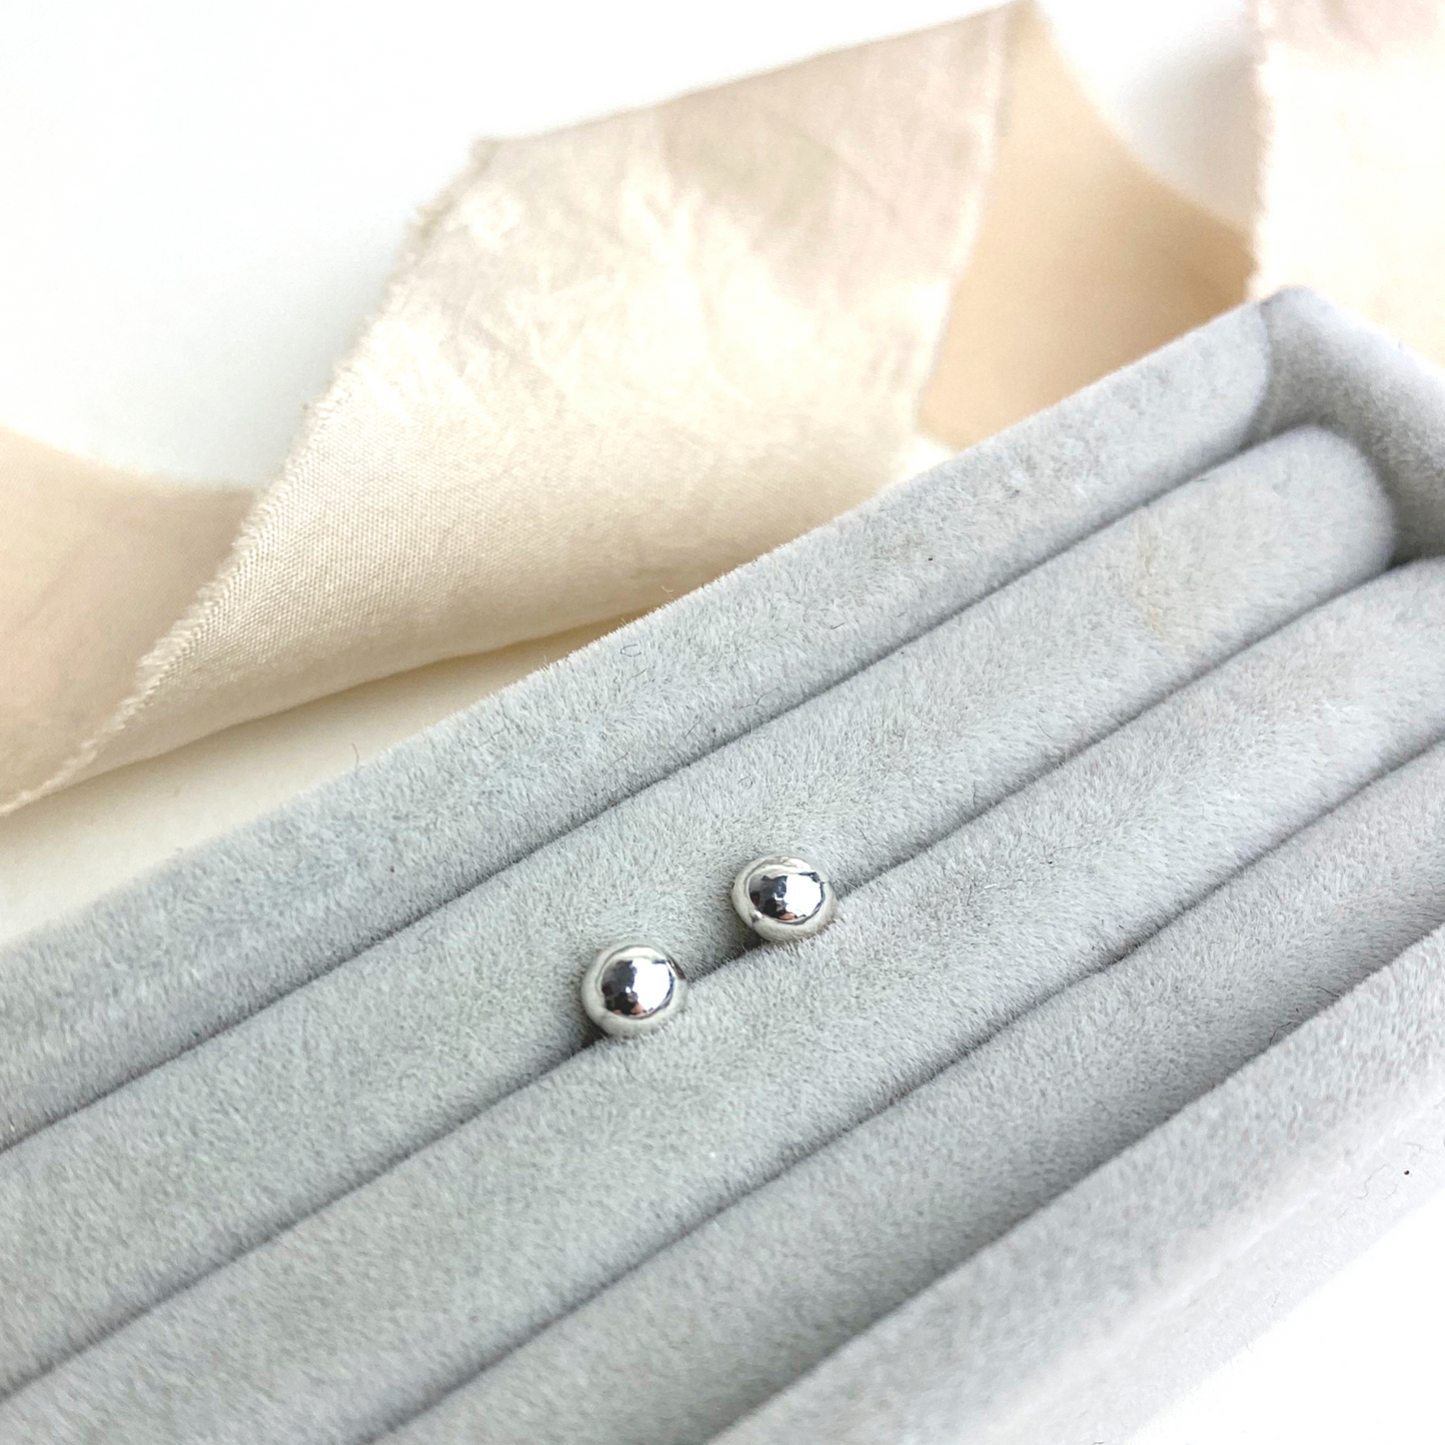 The Farden Recycled Silver Studs - sterling silver earrings - recycled silver ball stud earrings